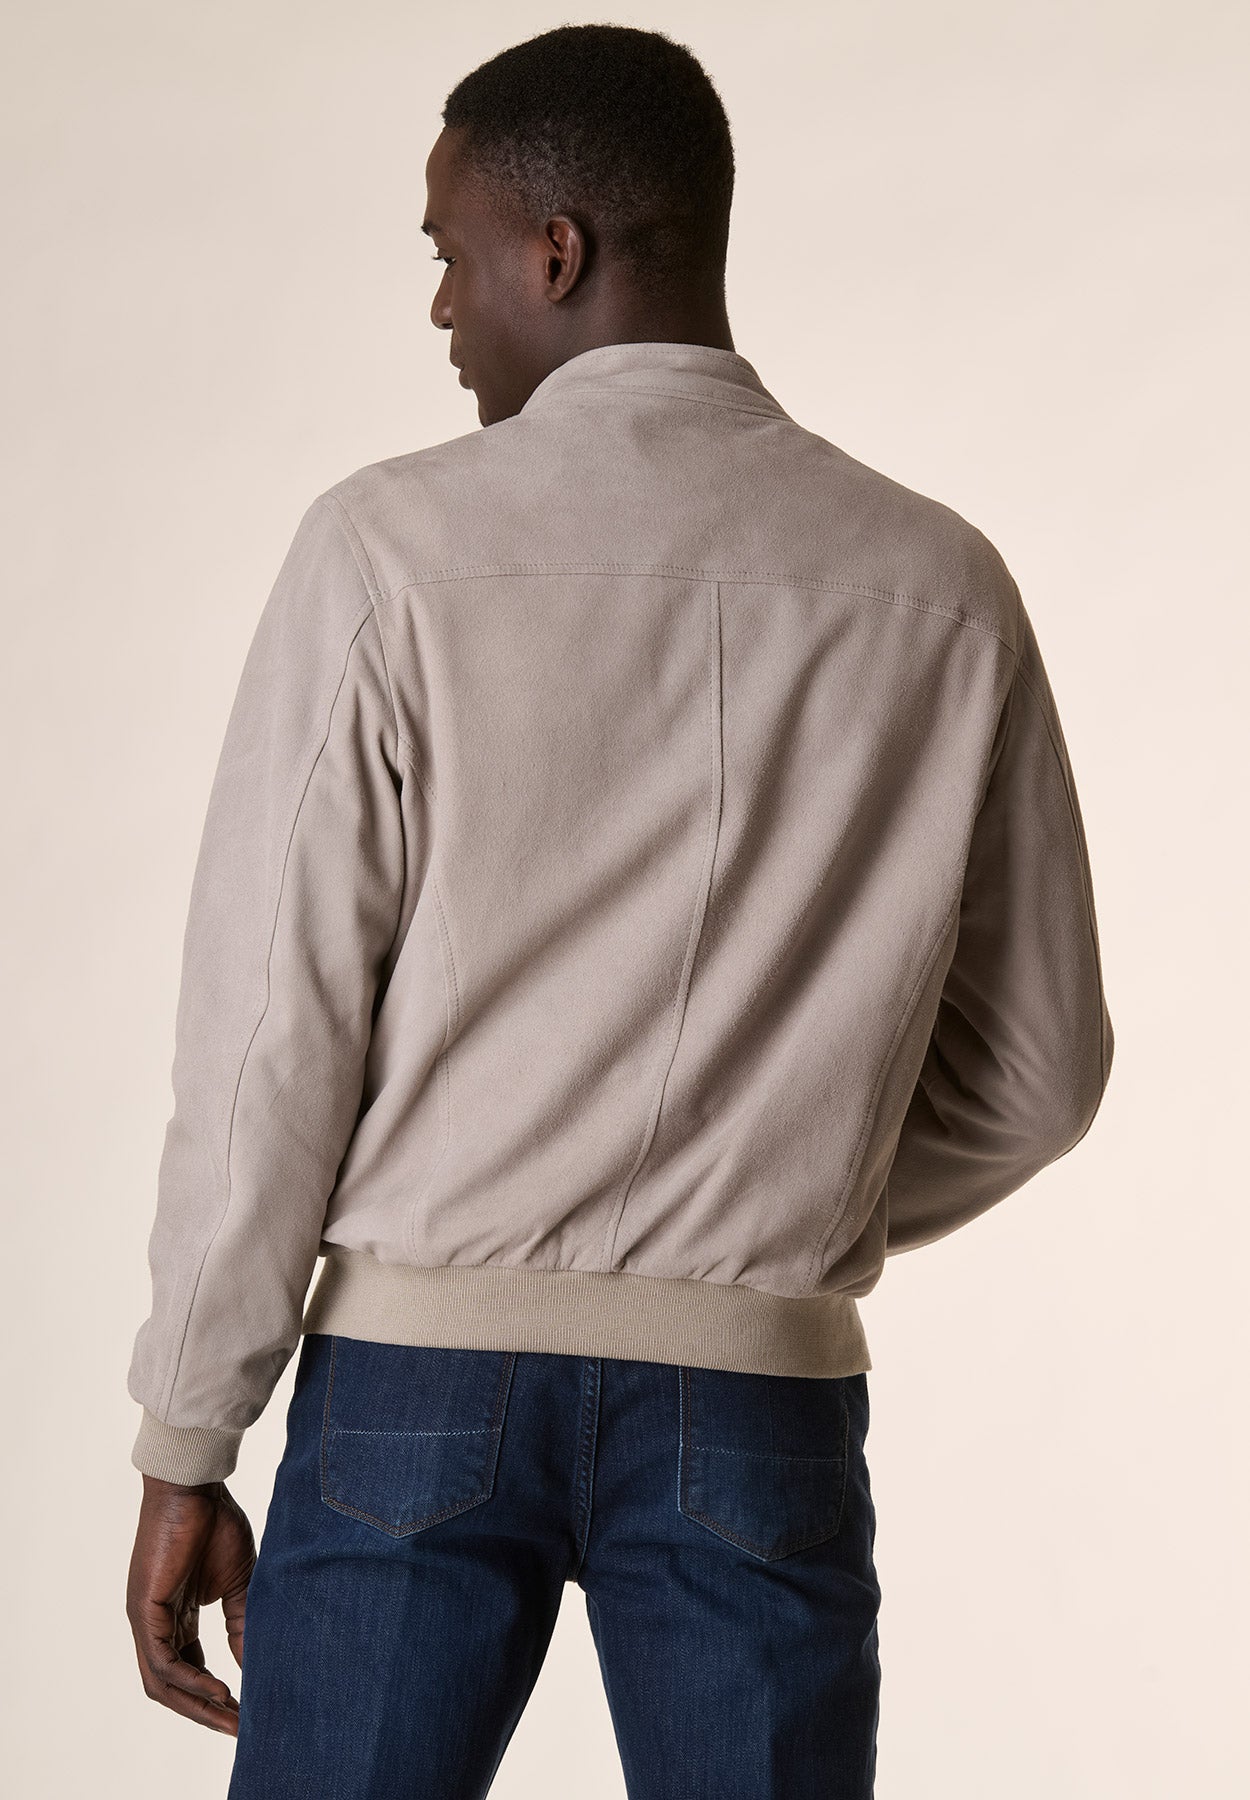 Dove-coloured suede bomber jacket